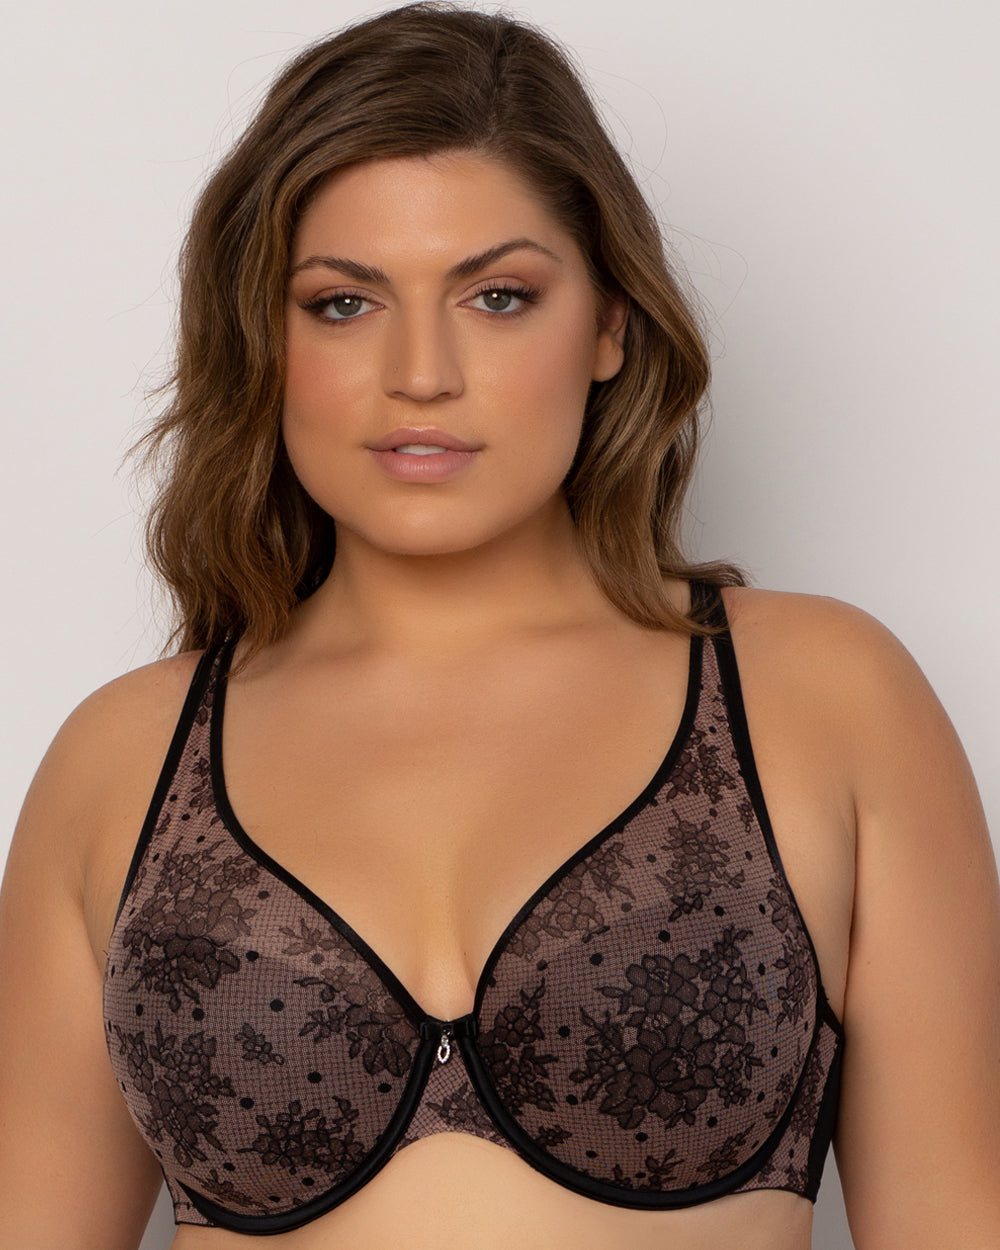 Curvy Couture Women's Sexy Sheer Mesh Plus Size Full Coverage Bra